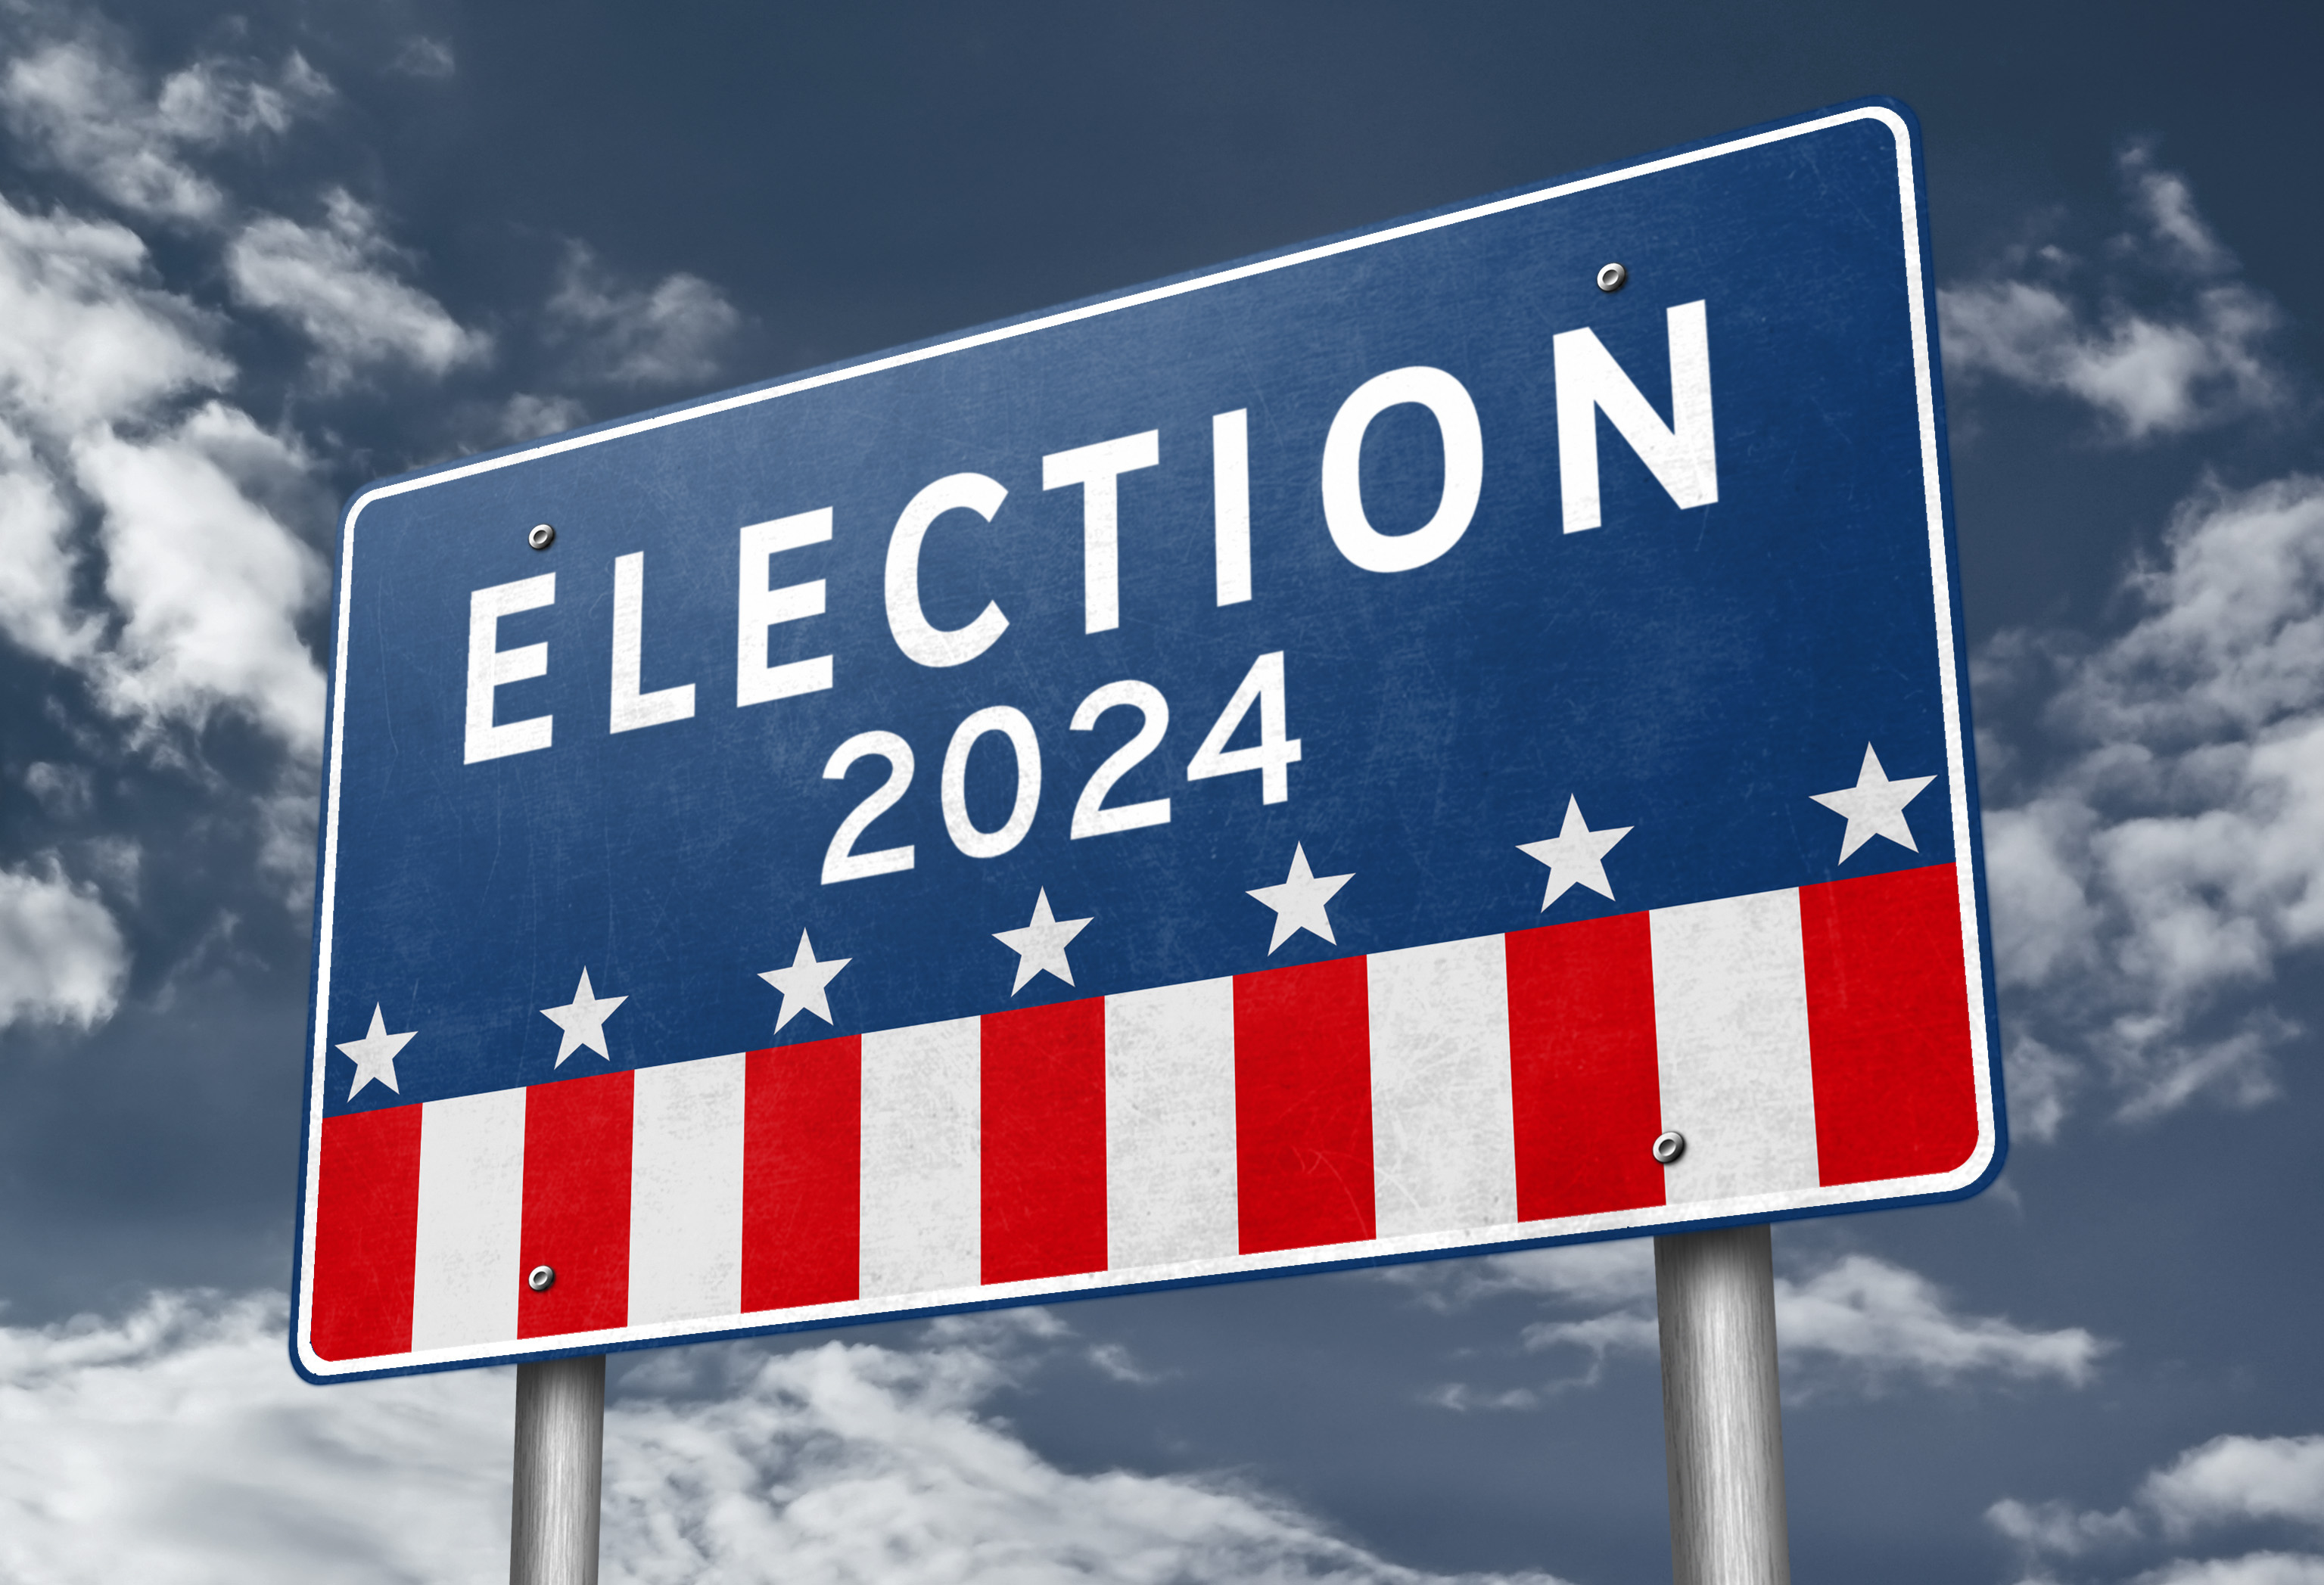 Sign reading &quot;ELECTION 2024&quot; with patriotic stars and stripes, against a cloudy sky